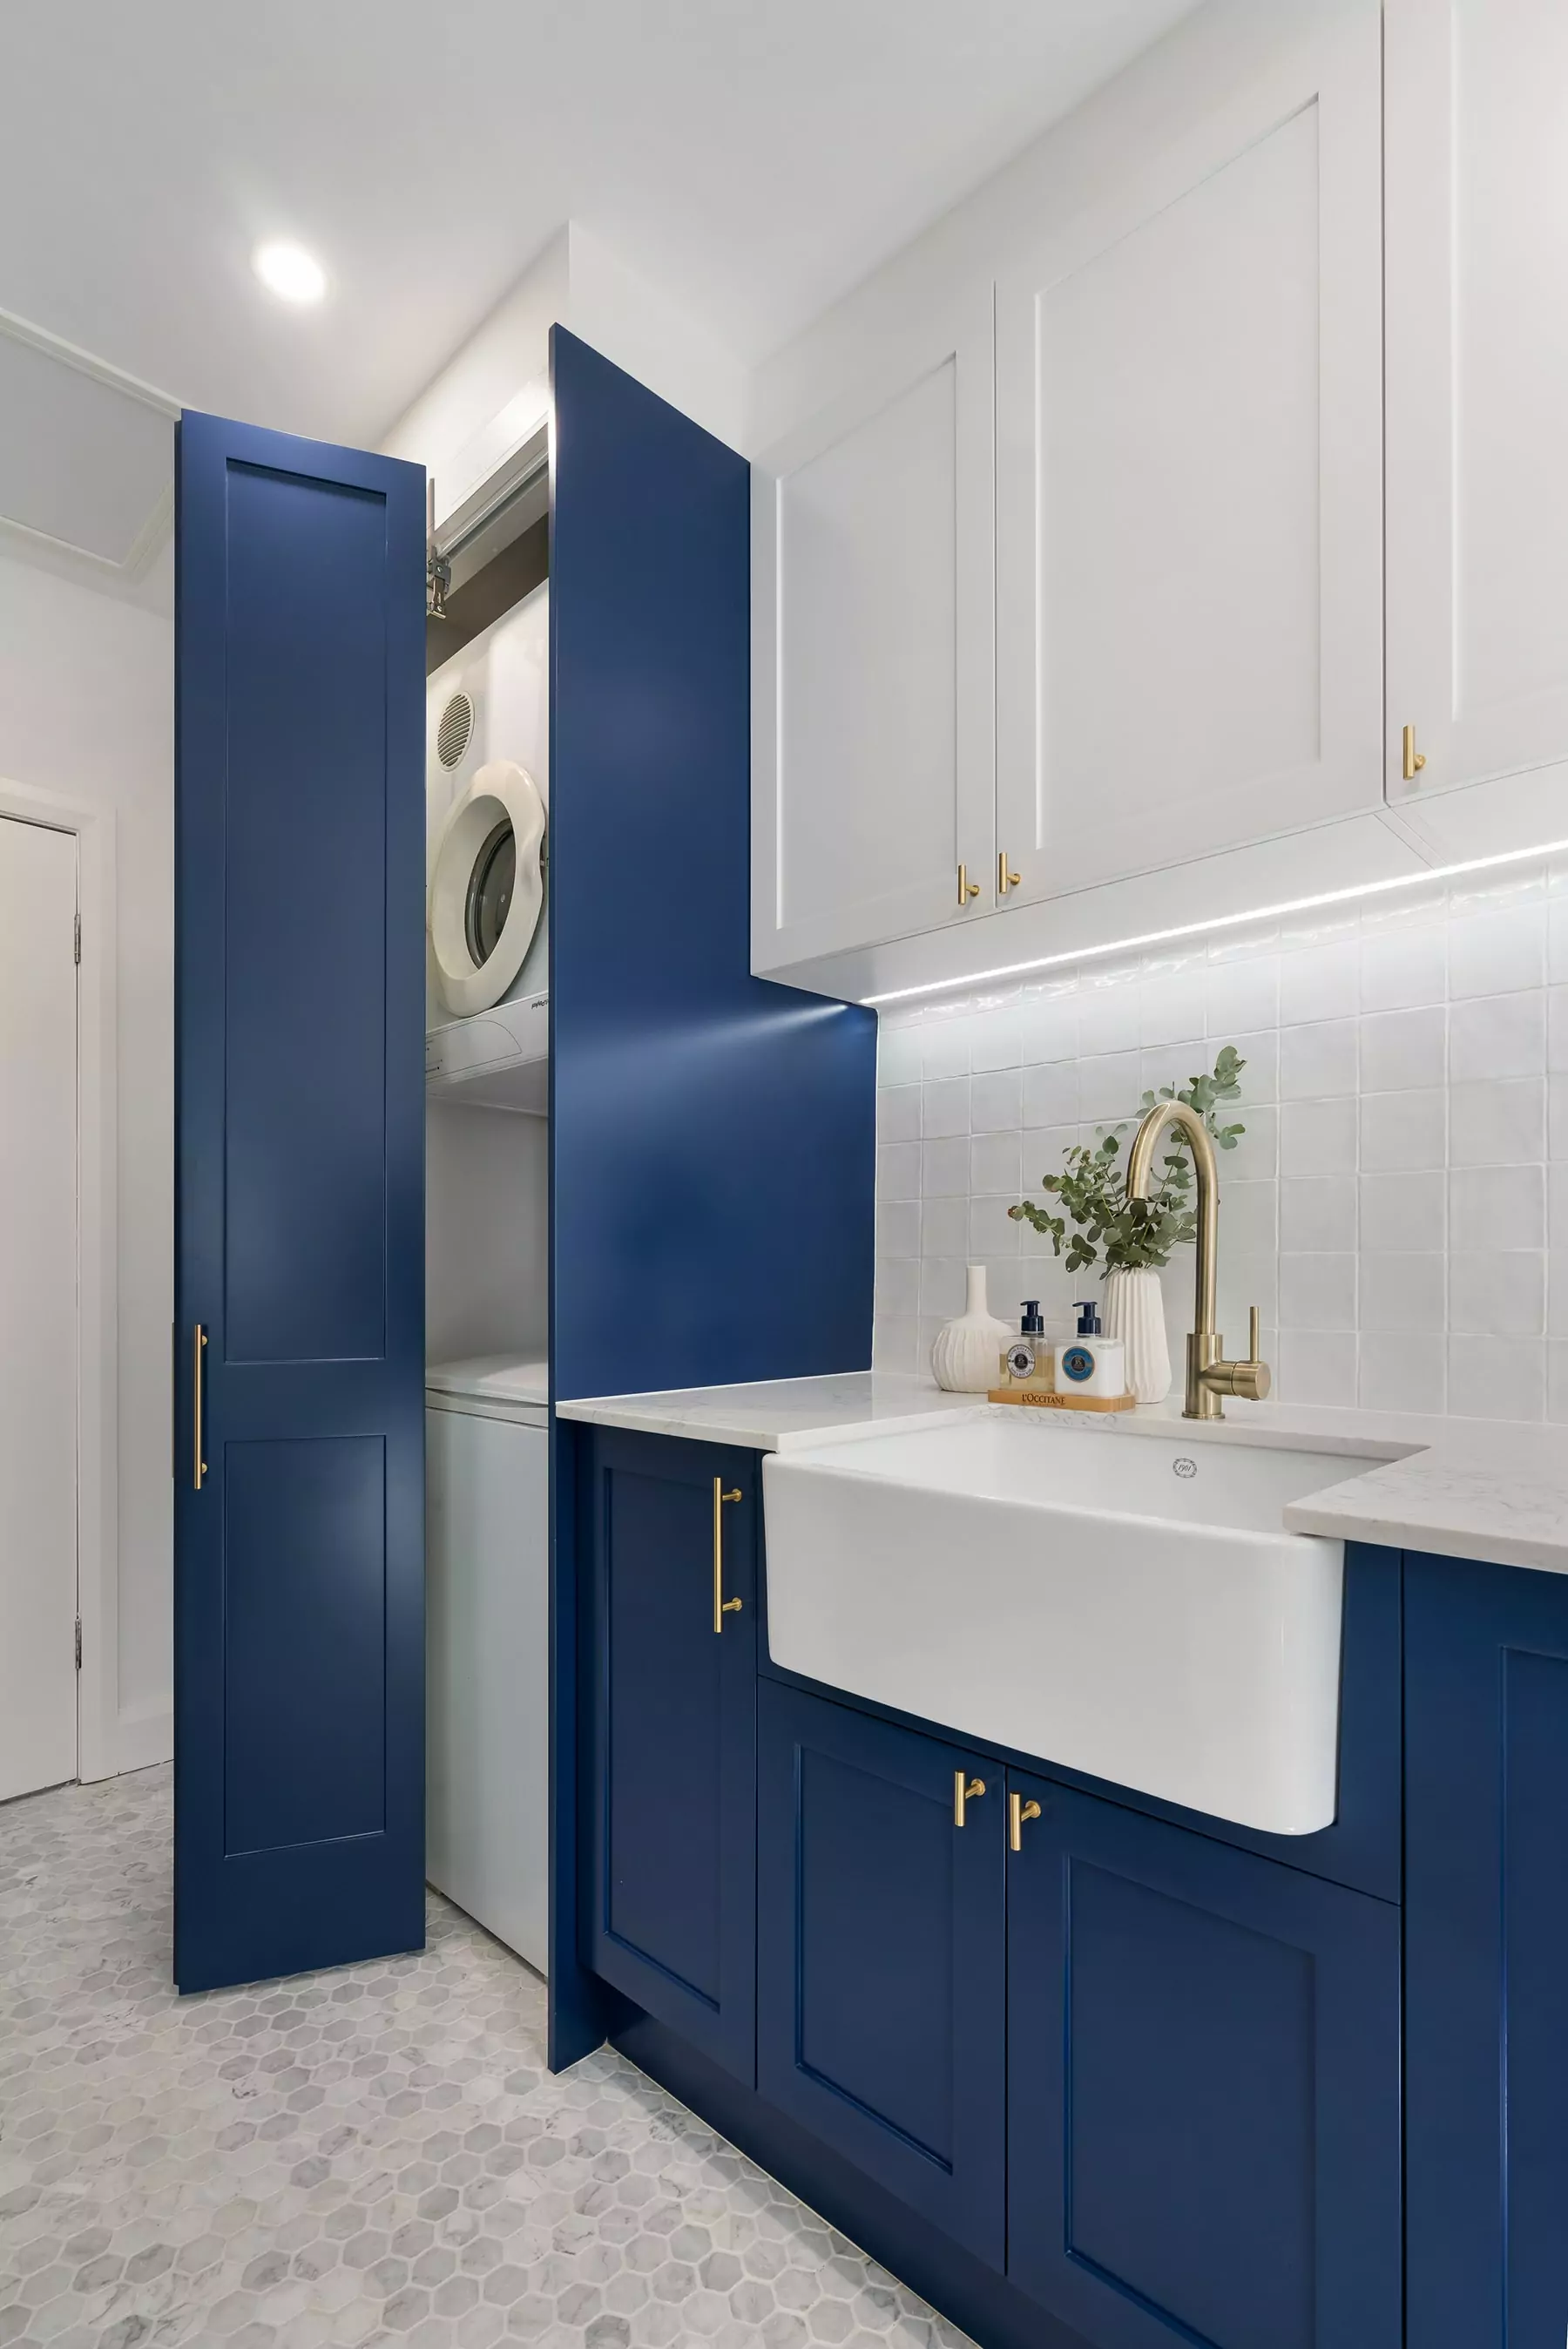 laundry with gold handles and blue accents